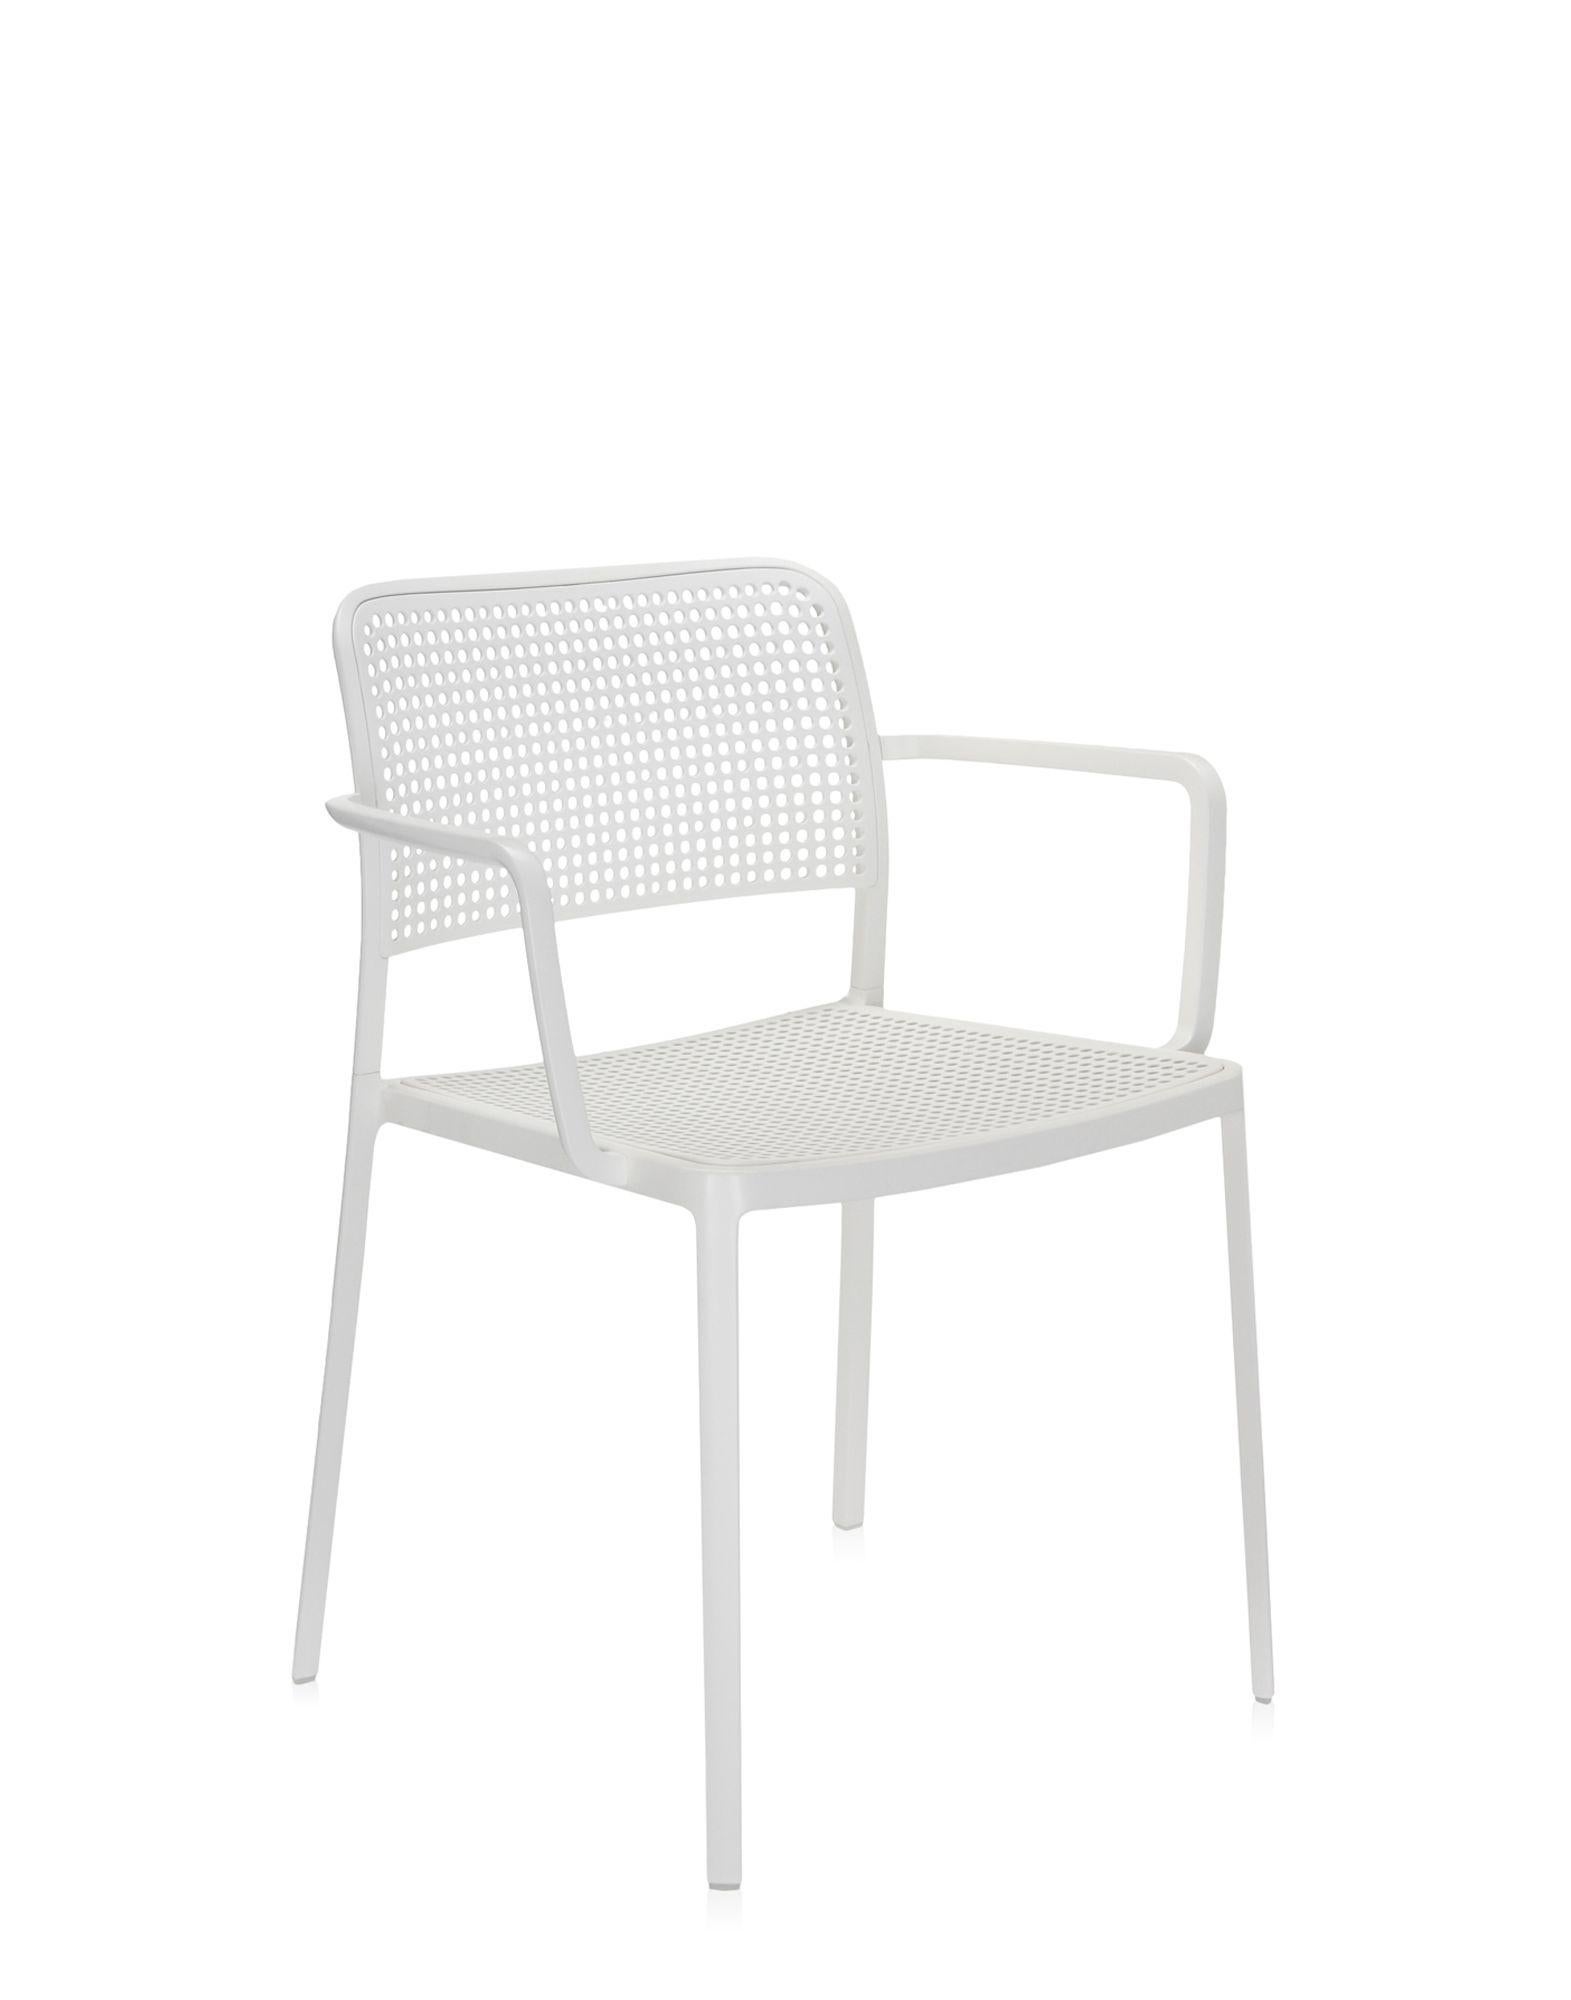 Audrey is a versatile and contemporary chair which because of its simple, clean lines obtained through a special die-casting process is composed of only two parts and made without welding. It is multifunctional and adaptable to all uses - indoor,